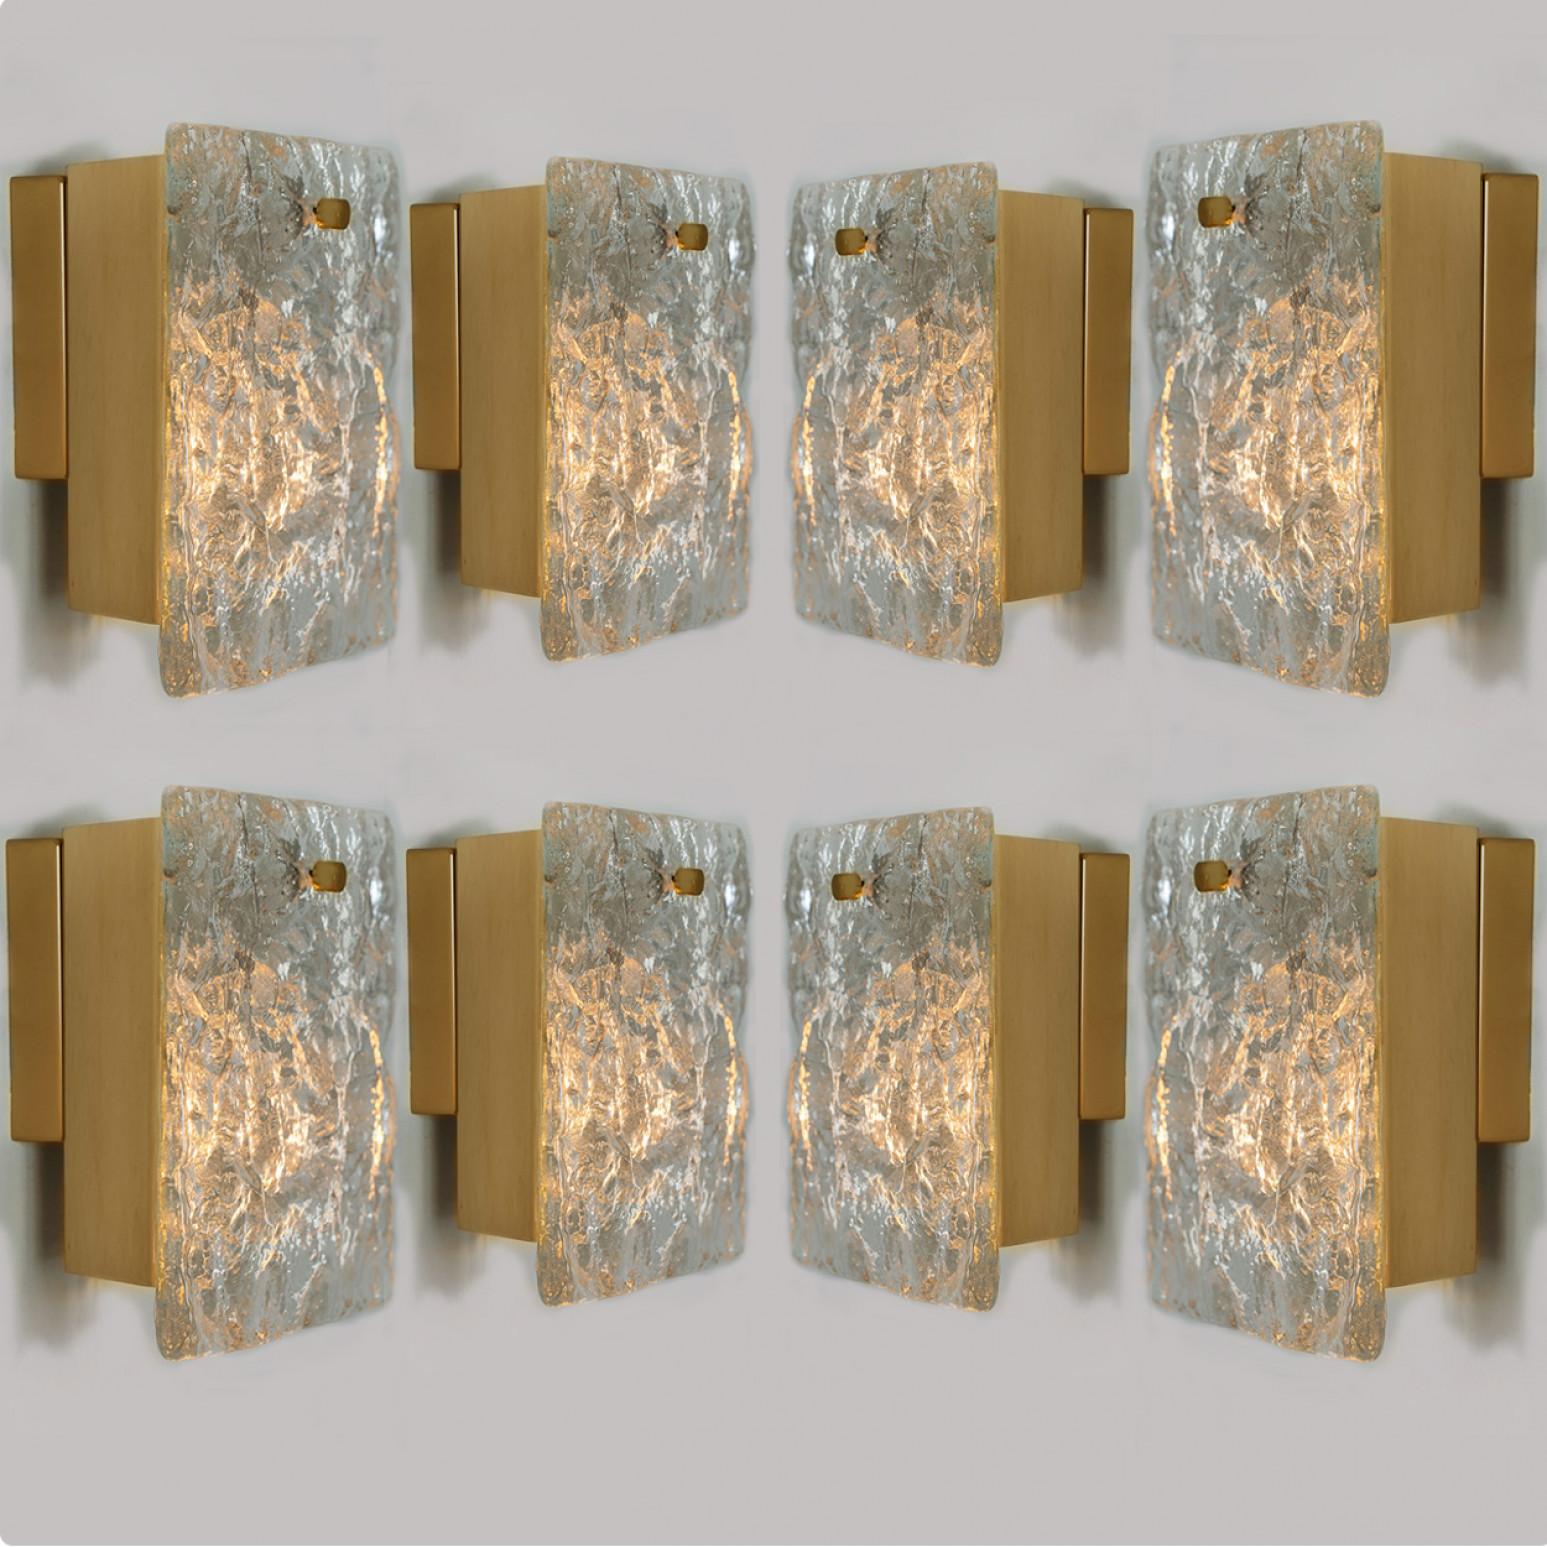 Beautiful wall lamps by J. T. Kalmar, model: Karlstein, Vienna, circa 1960. With relief-like crystal glass (dispersion glass). With a brass plated back plate. Illuminates beautifully. The sconces have a pull-string (on and off) on the bottom (see